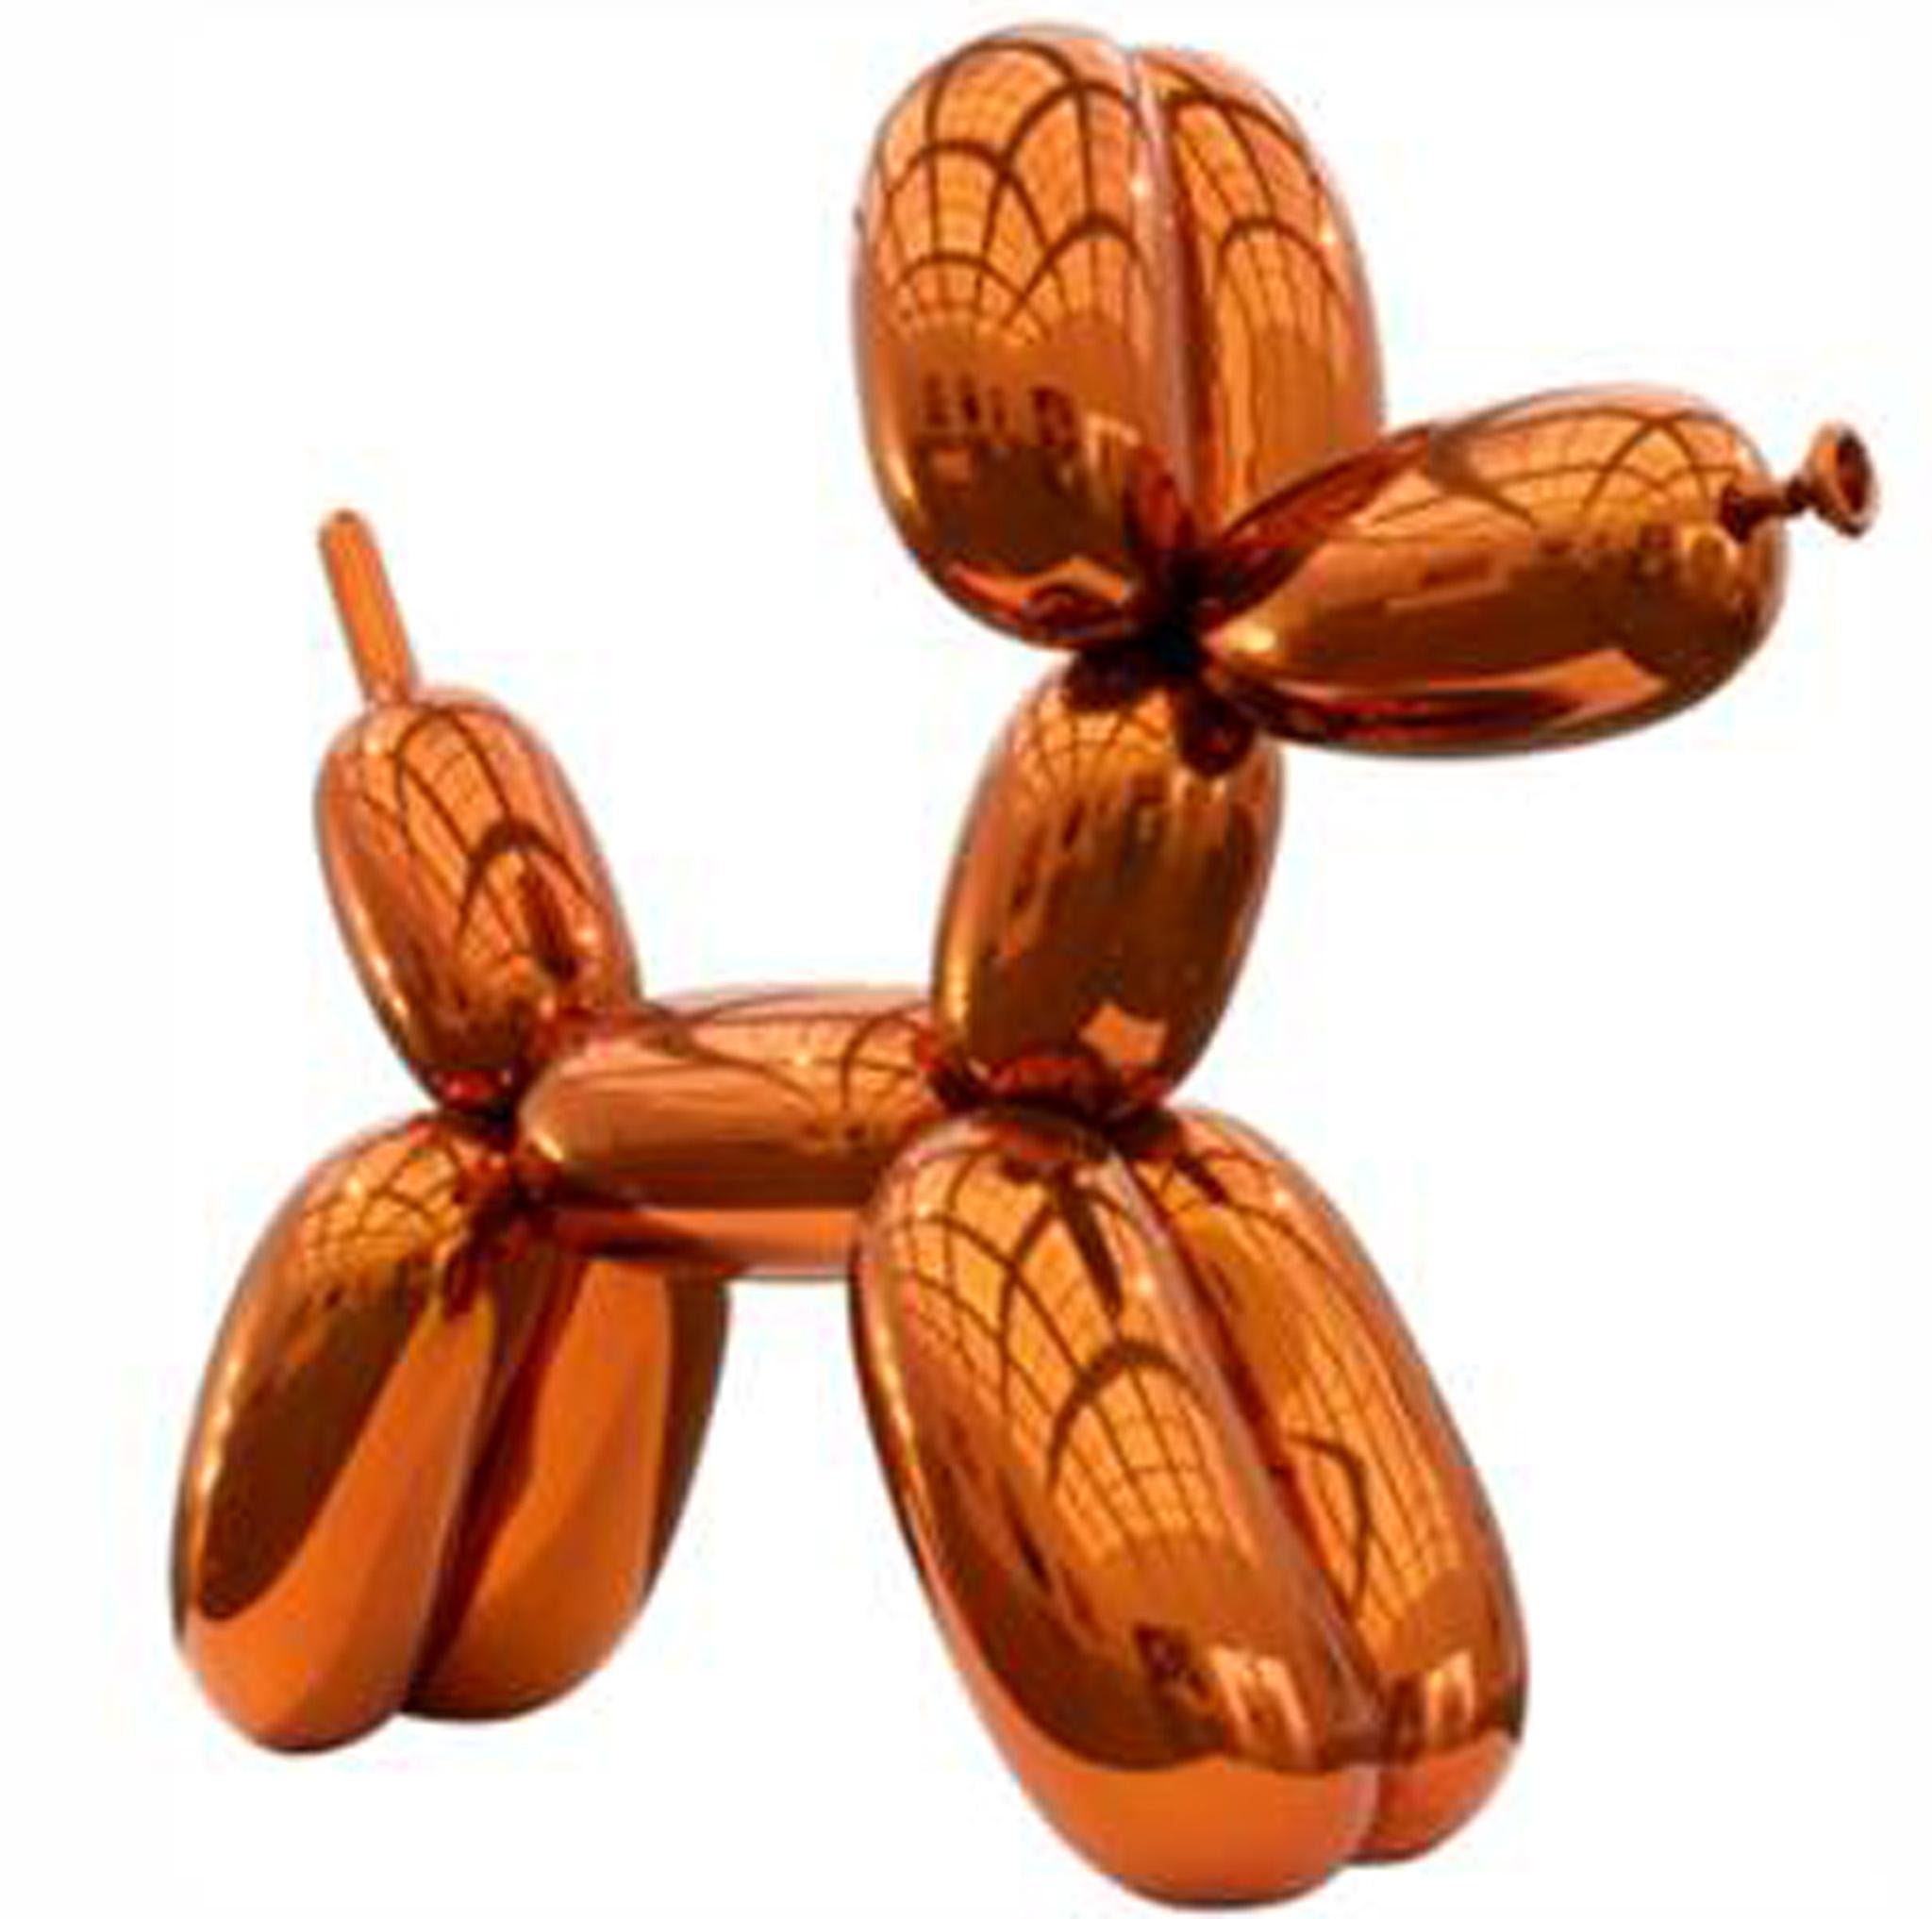 Jeff Koons' 'Balloon Dog' sold for $58.4m (£45.8m) at auction (Christies)